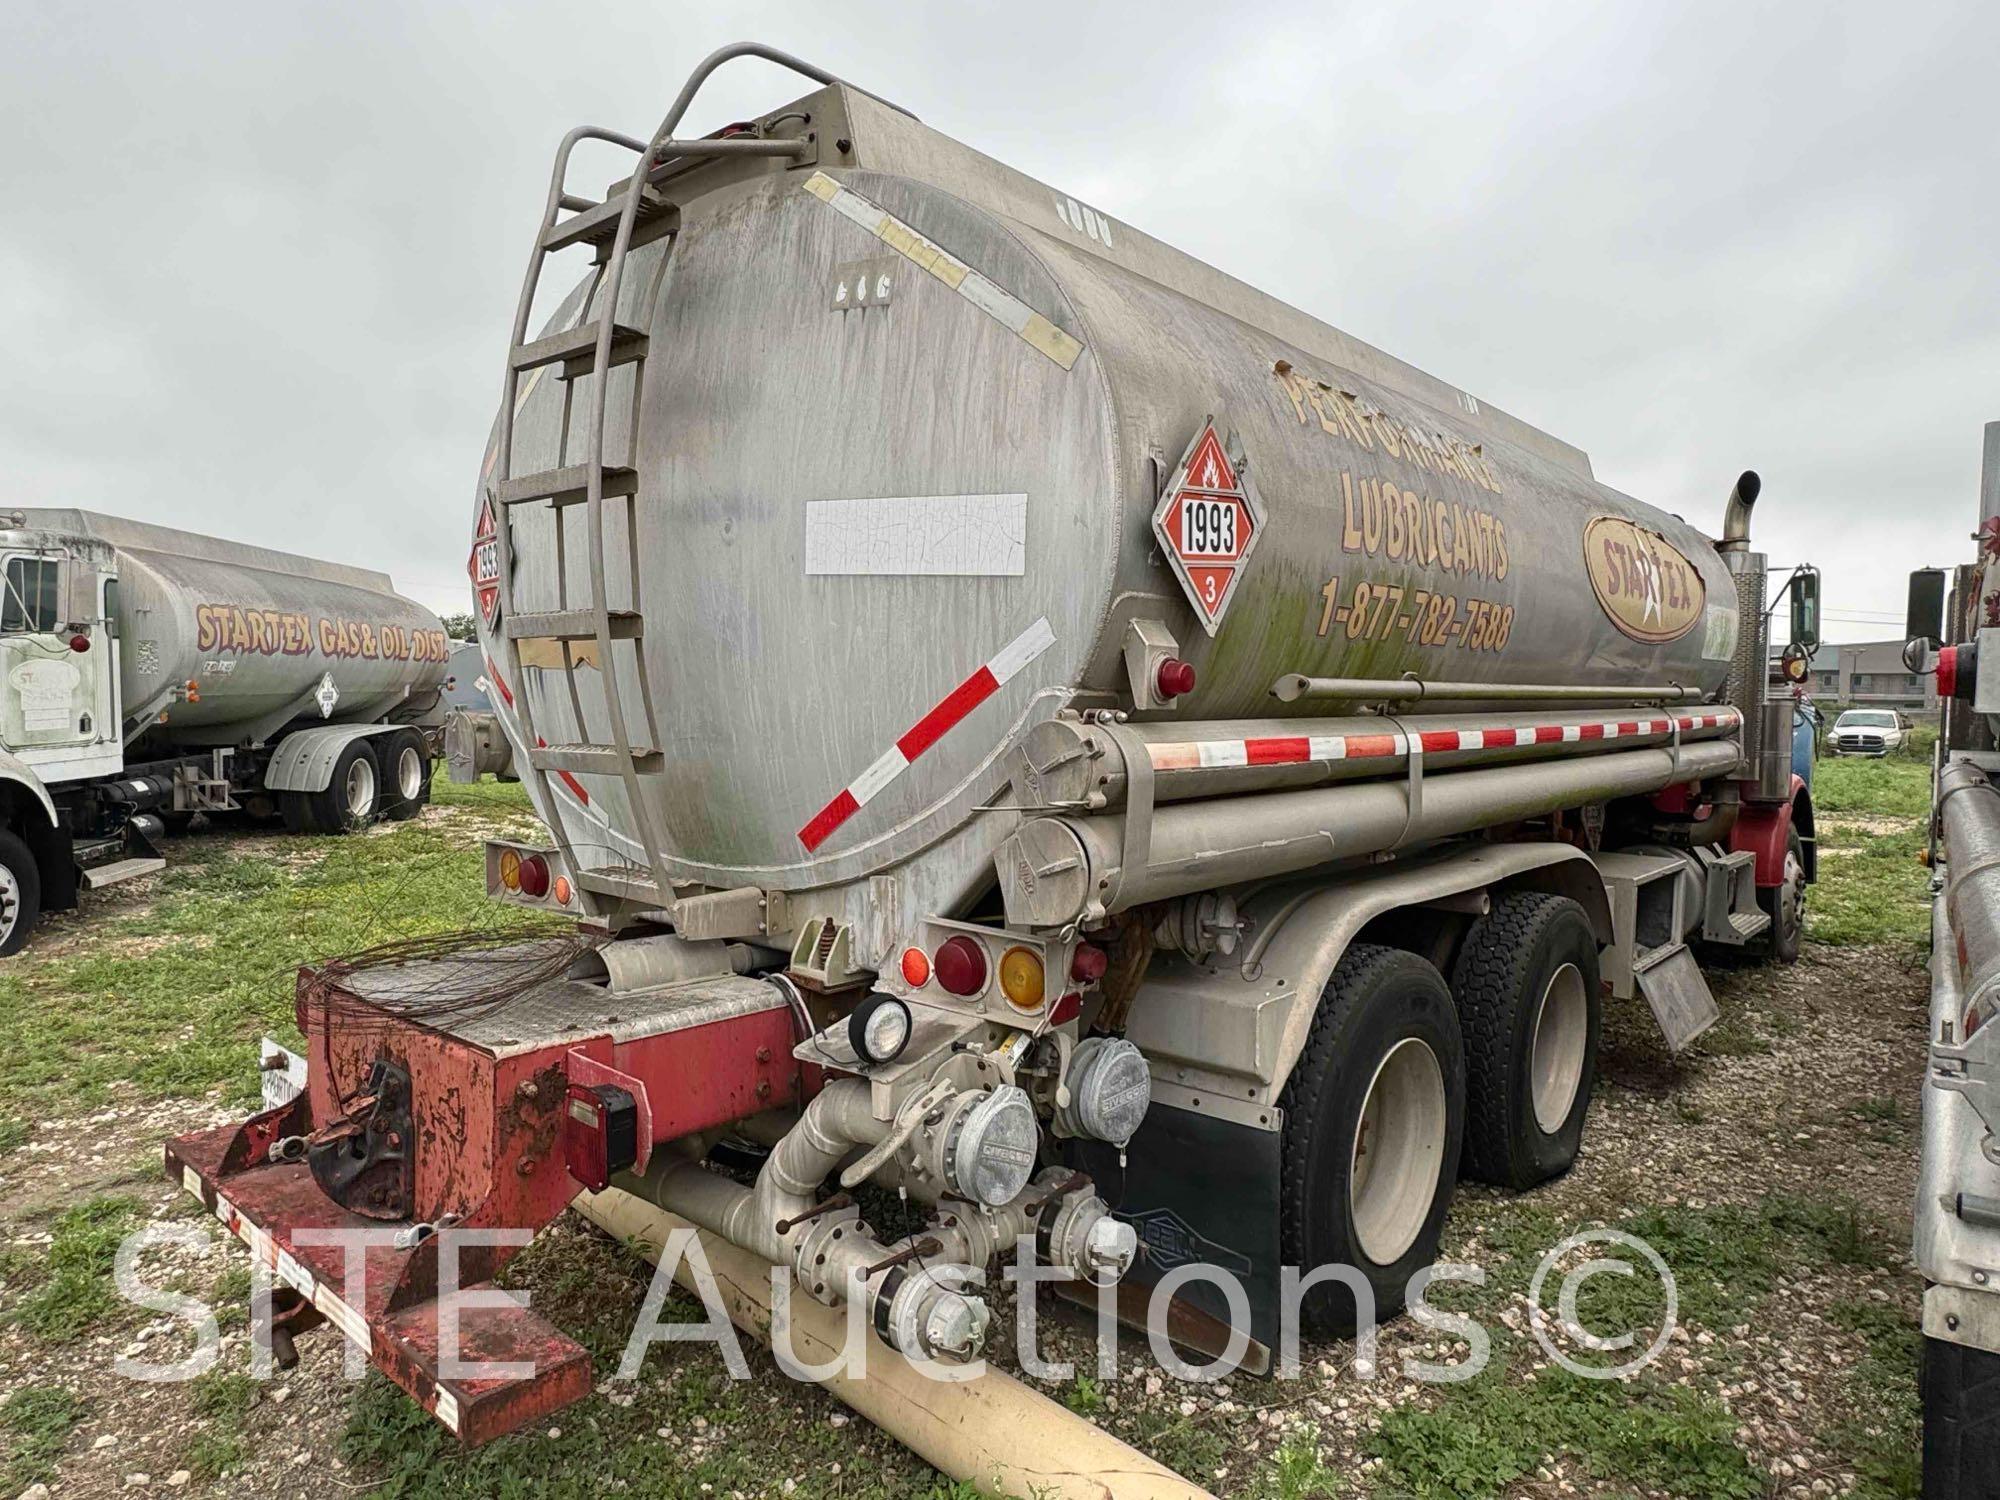 1999 Freightliner T/A Fuel Truck